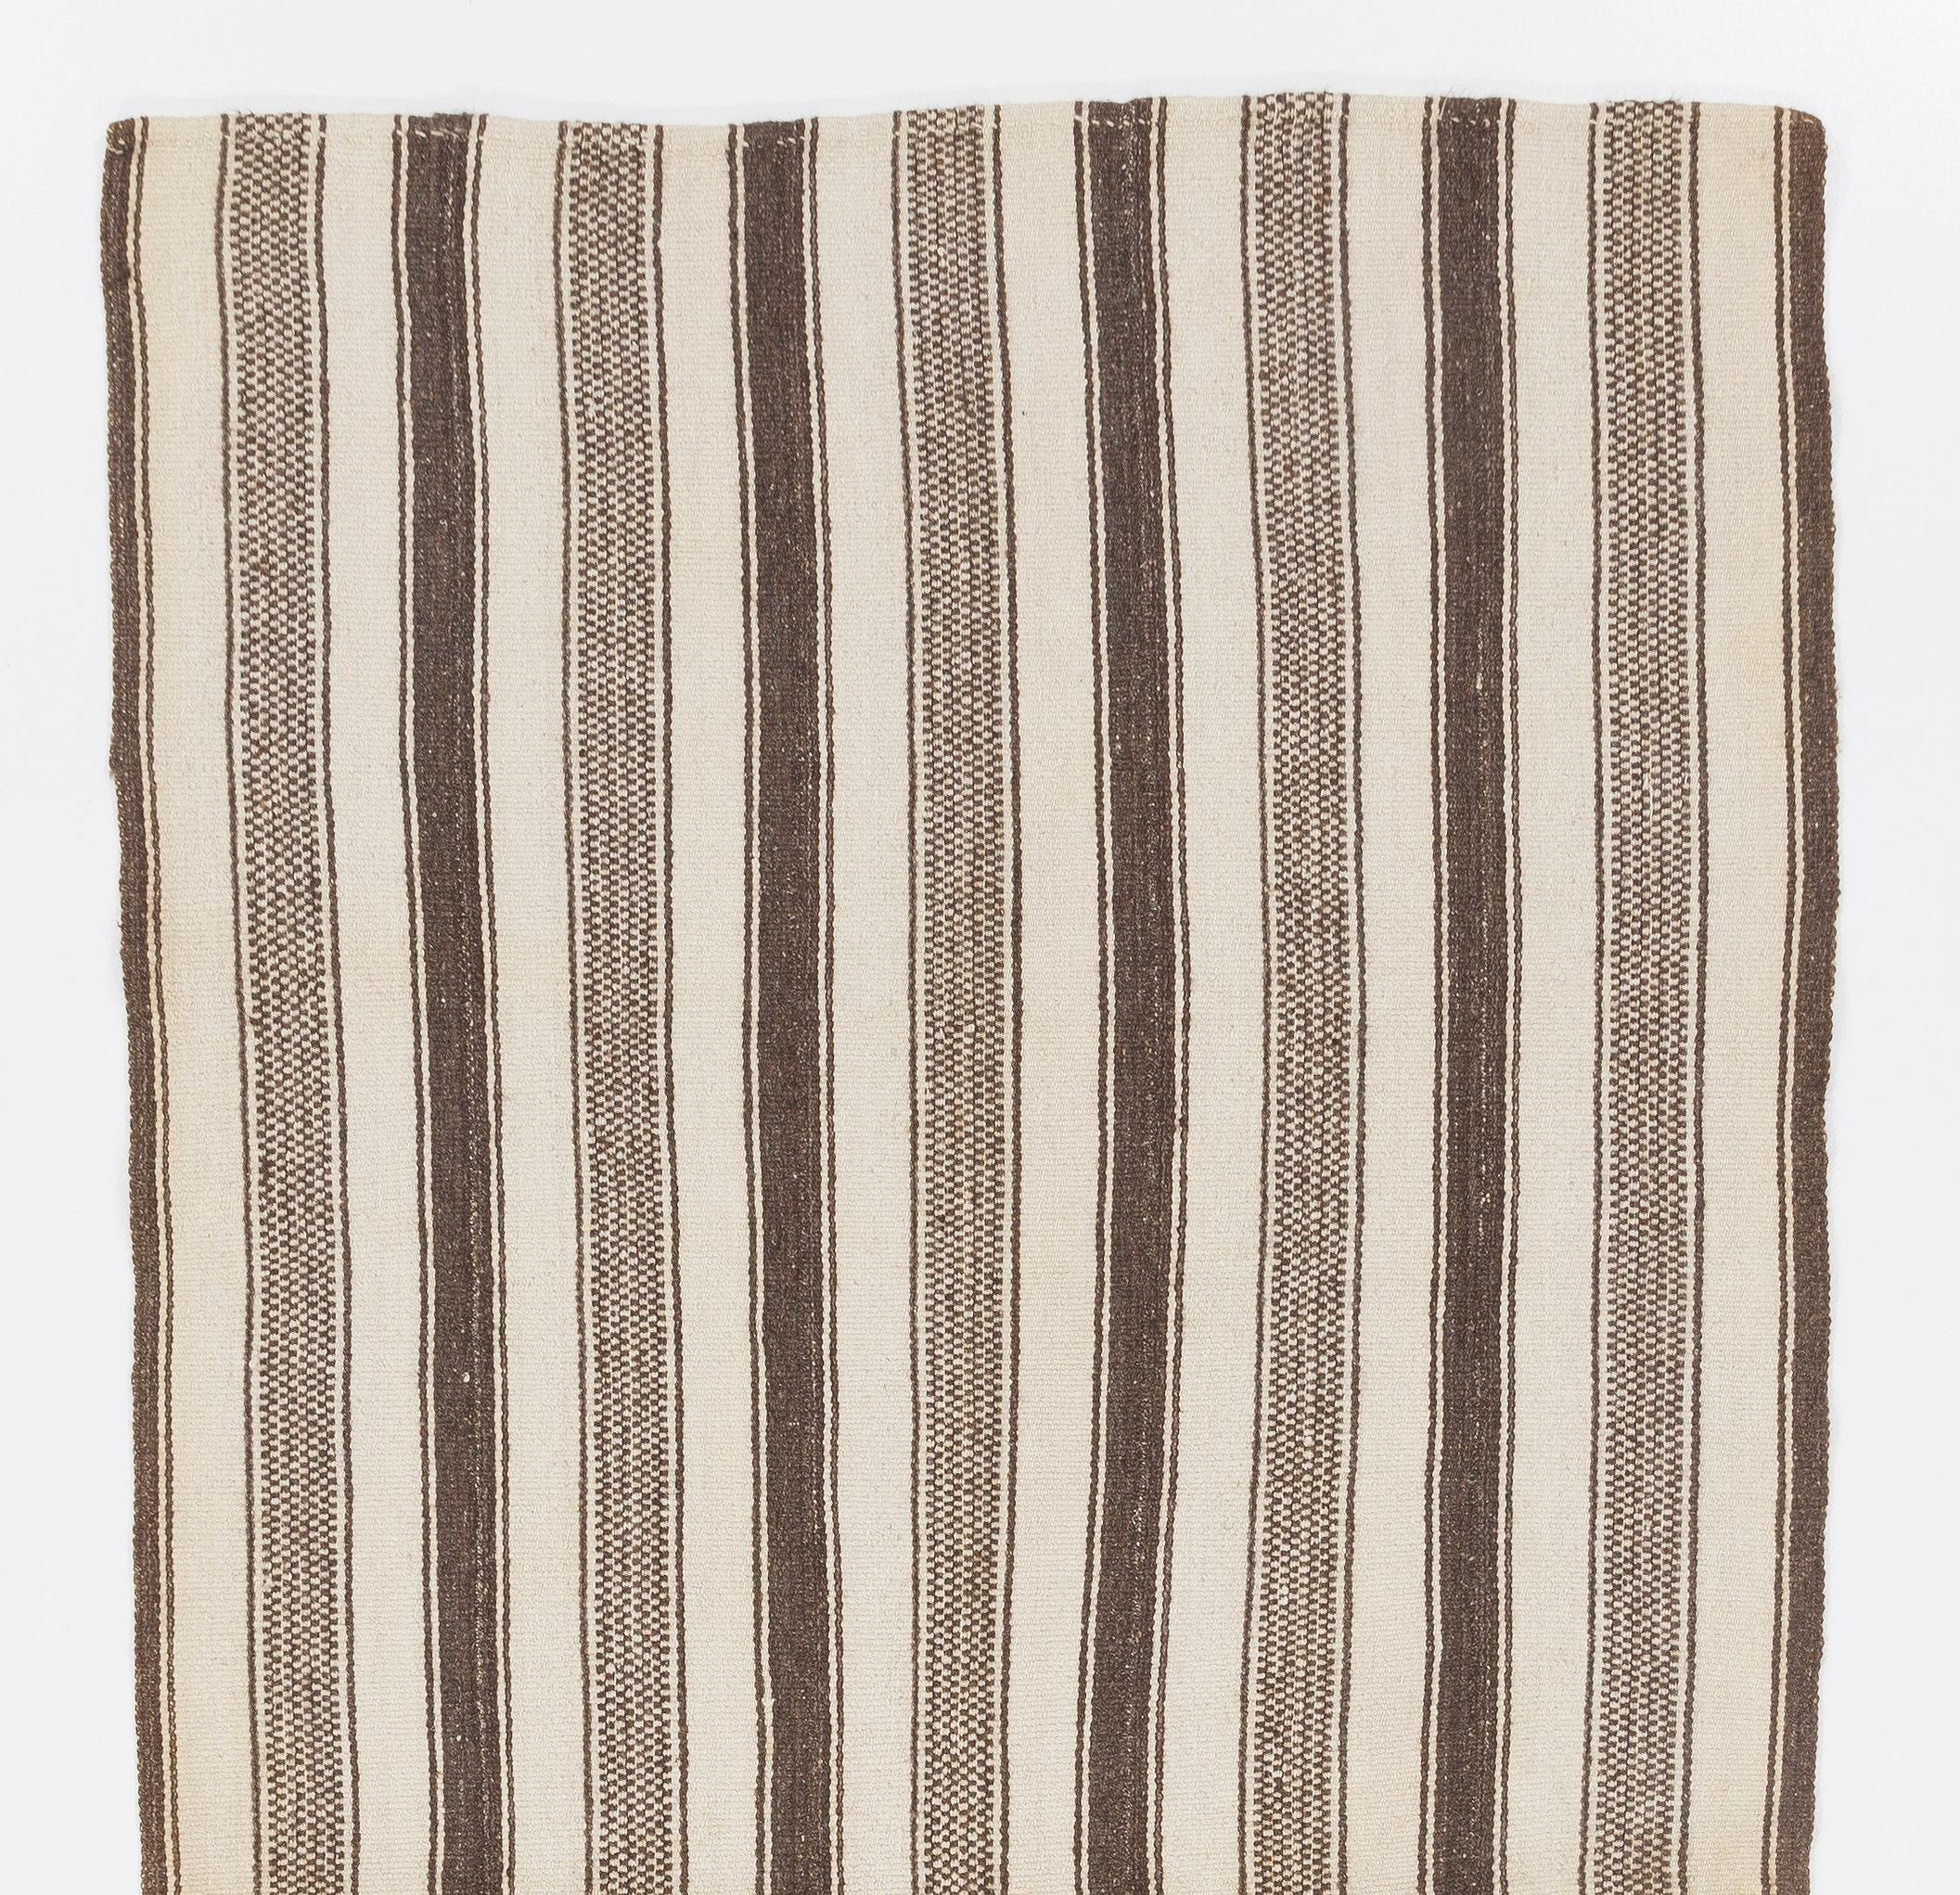 Hand-Woven 4.4x9.2 Ft Vintage Striped Turkish Kilim Rug Made of Natural Beige & Brown Wool For Sale